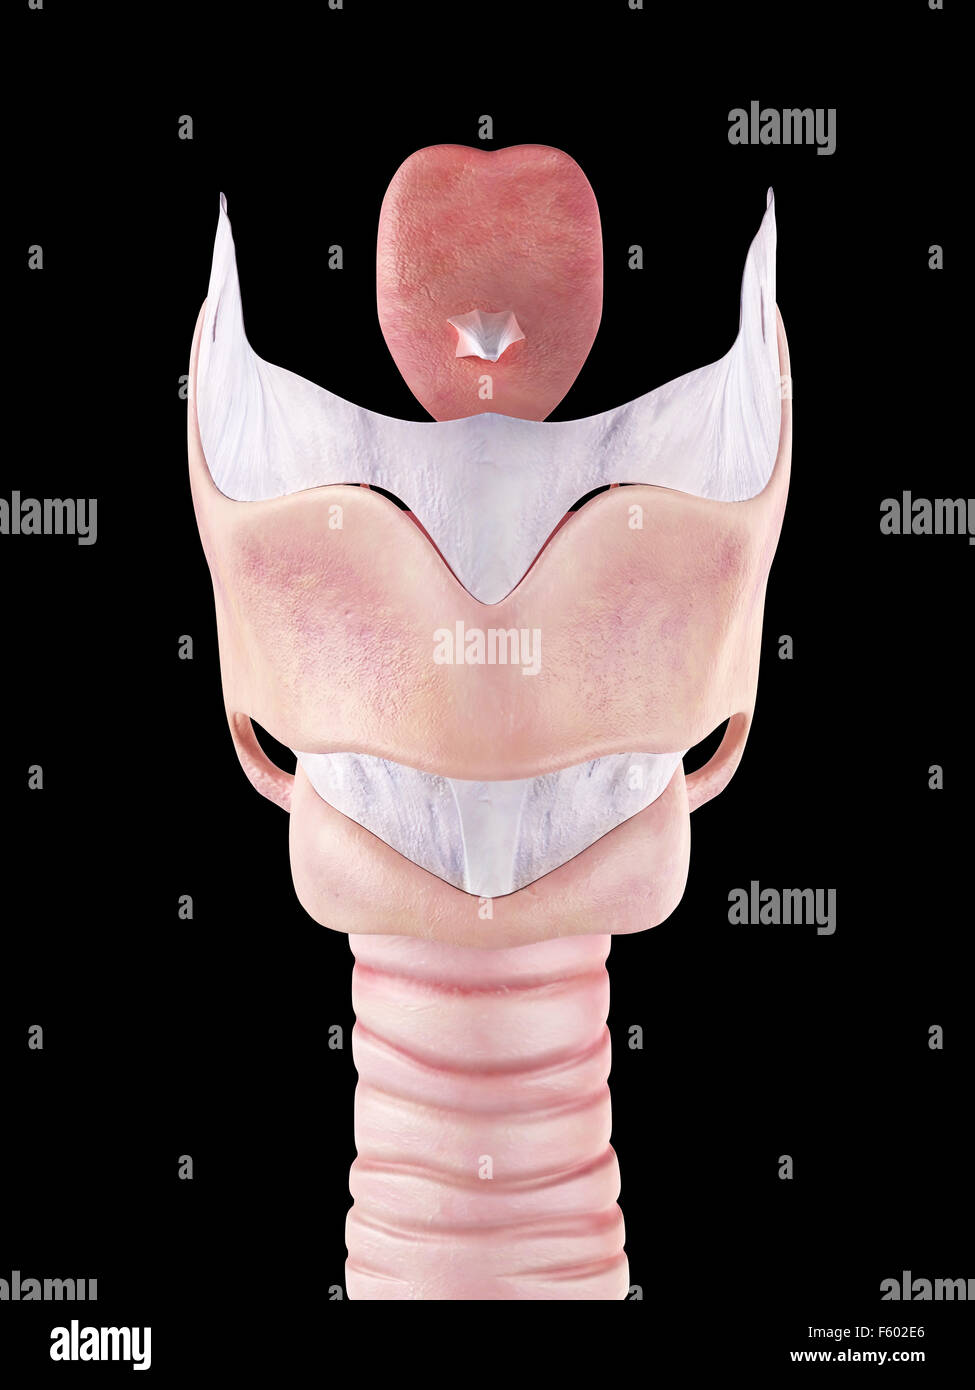 medically accurate illustration of the larynx Stock Photo